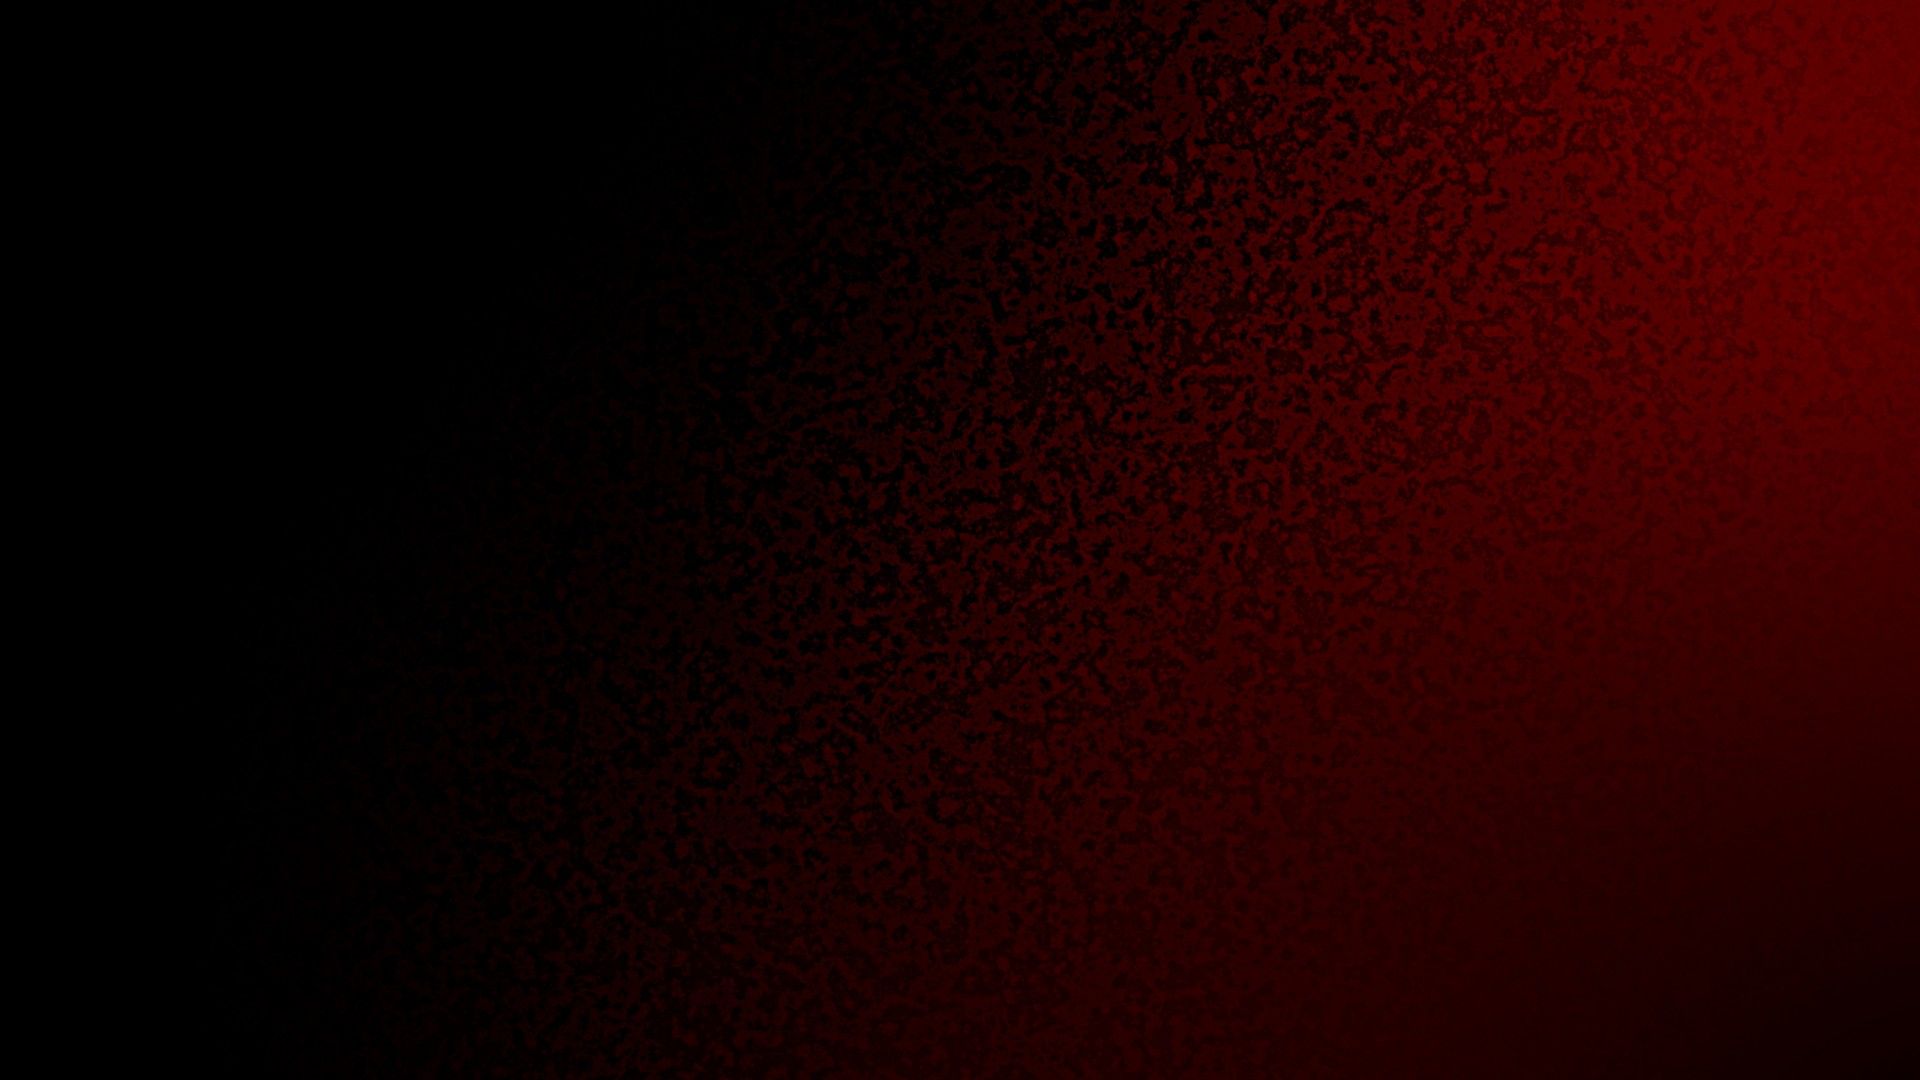 Red and black abstract wallpaper with a texture - Dark red